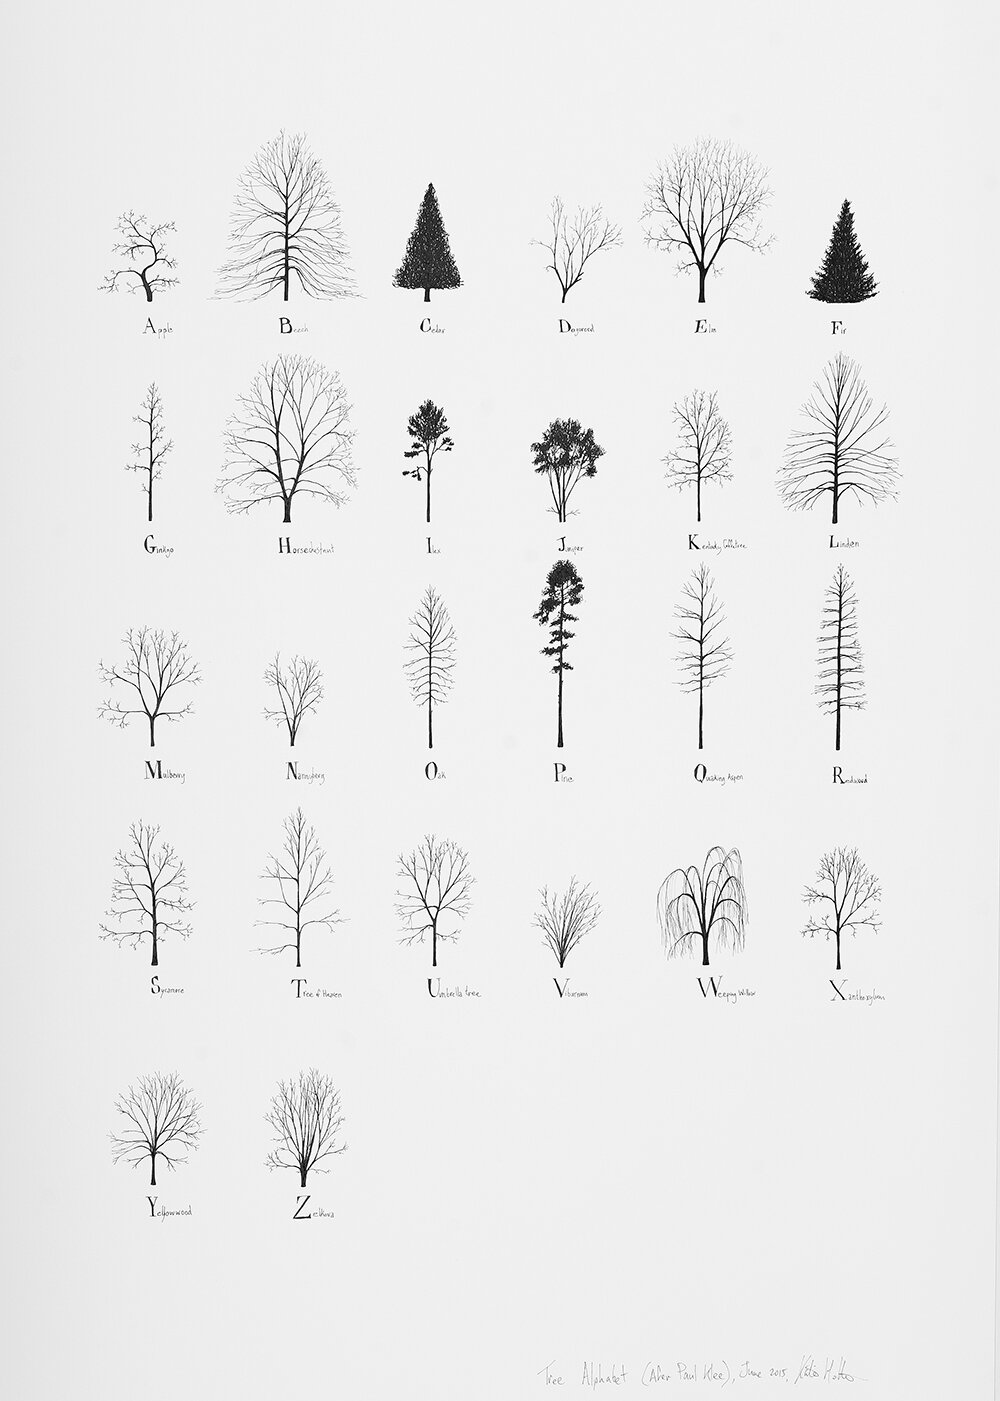  Katie Holten.  Tree Alphabet , 2015, ink on paper, 100 x 70 cm, commissioned by the Zentrum Paul Klee, Bern, Switzerland for the group exhibition  About Trees,  October 16, 2015 - January 24, 2016.  